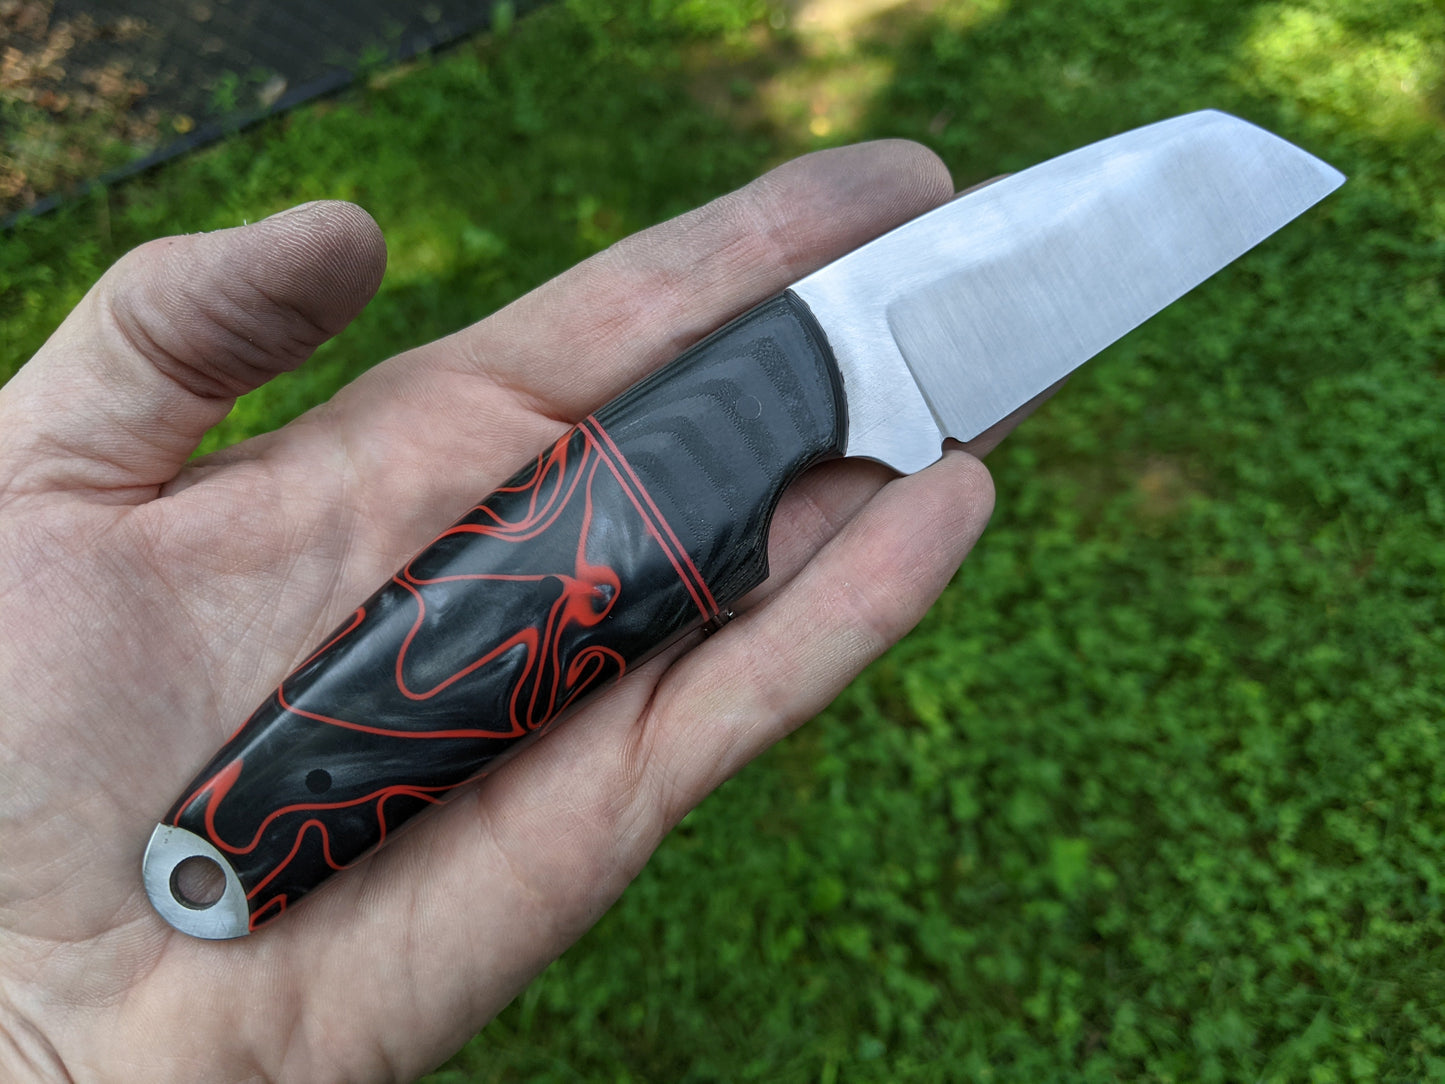 Wharncliffe blade knife with black and red Kirinite handle. 